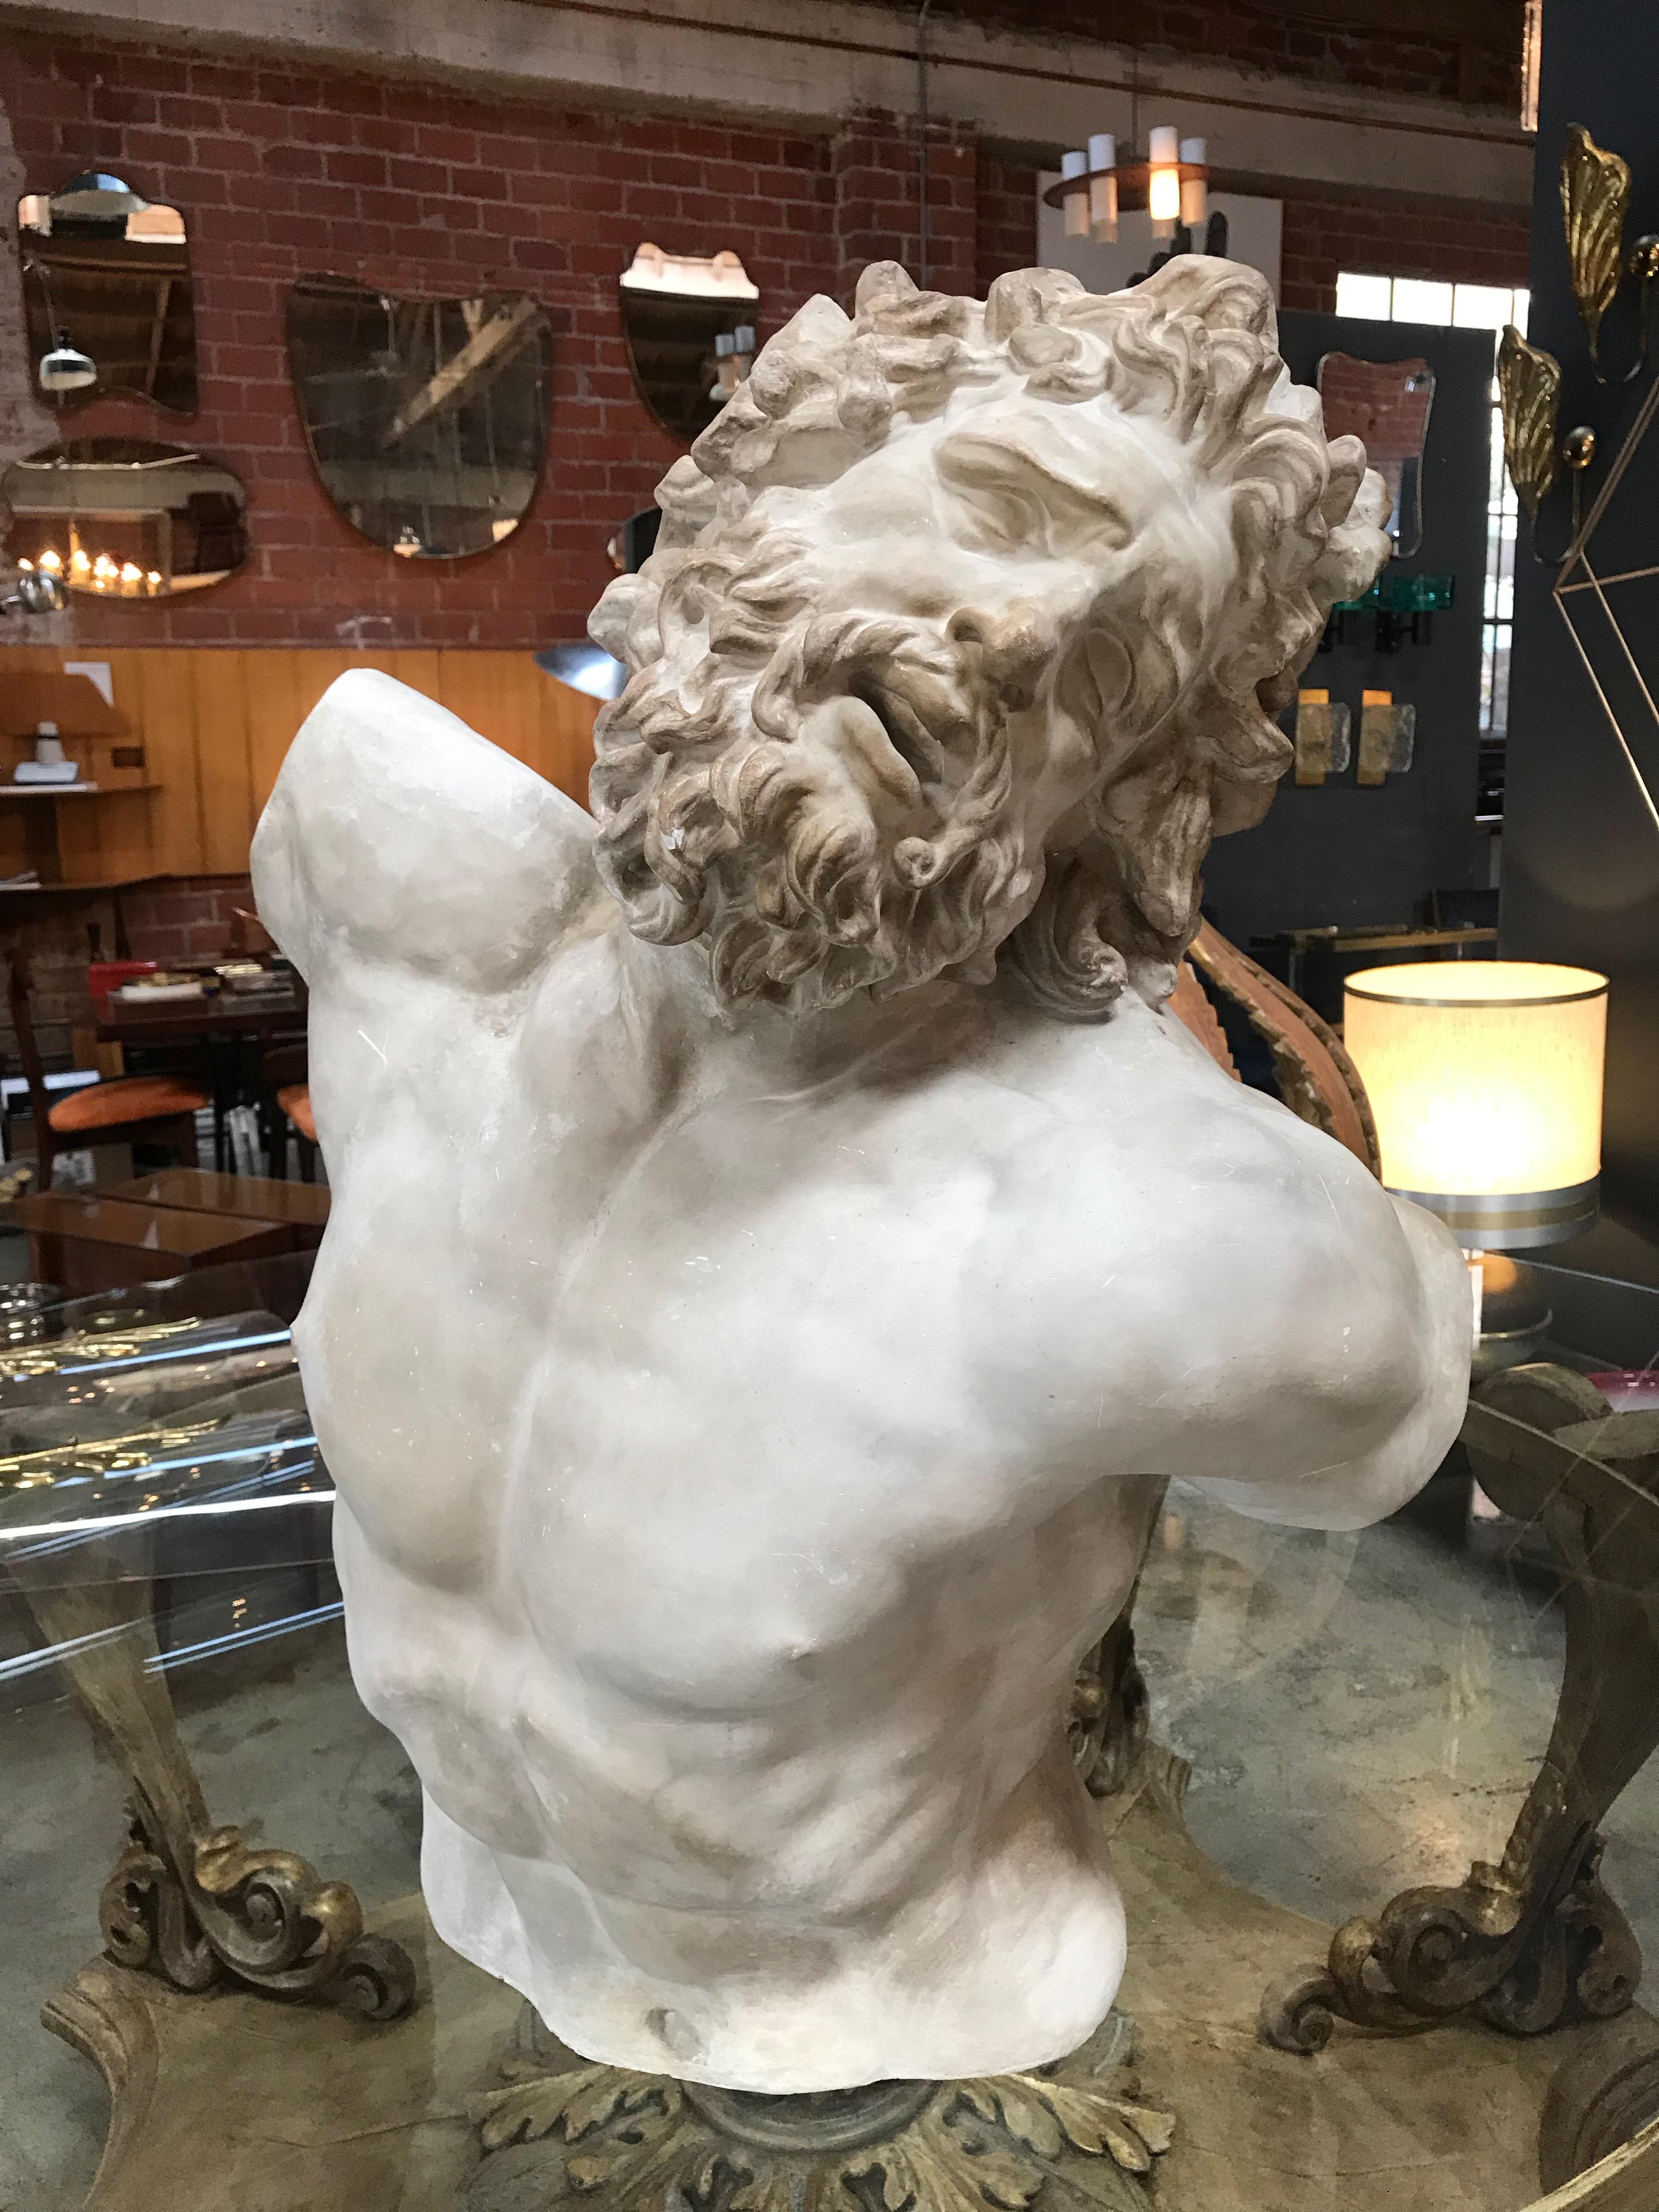 The original of this bust is exhibited at the Vatican Museum, Rome. Italy
The statue of Laocoön and His Sons, also called the Laocoön Group (Italian: Gruppo del Laocoonte), has been one of the most famous ancient sculptures ever since it was